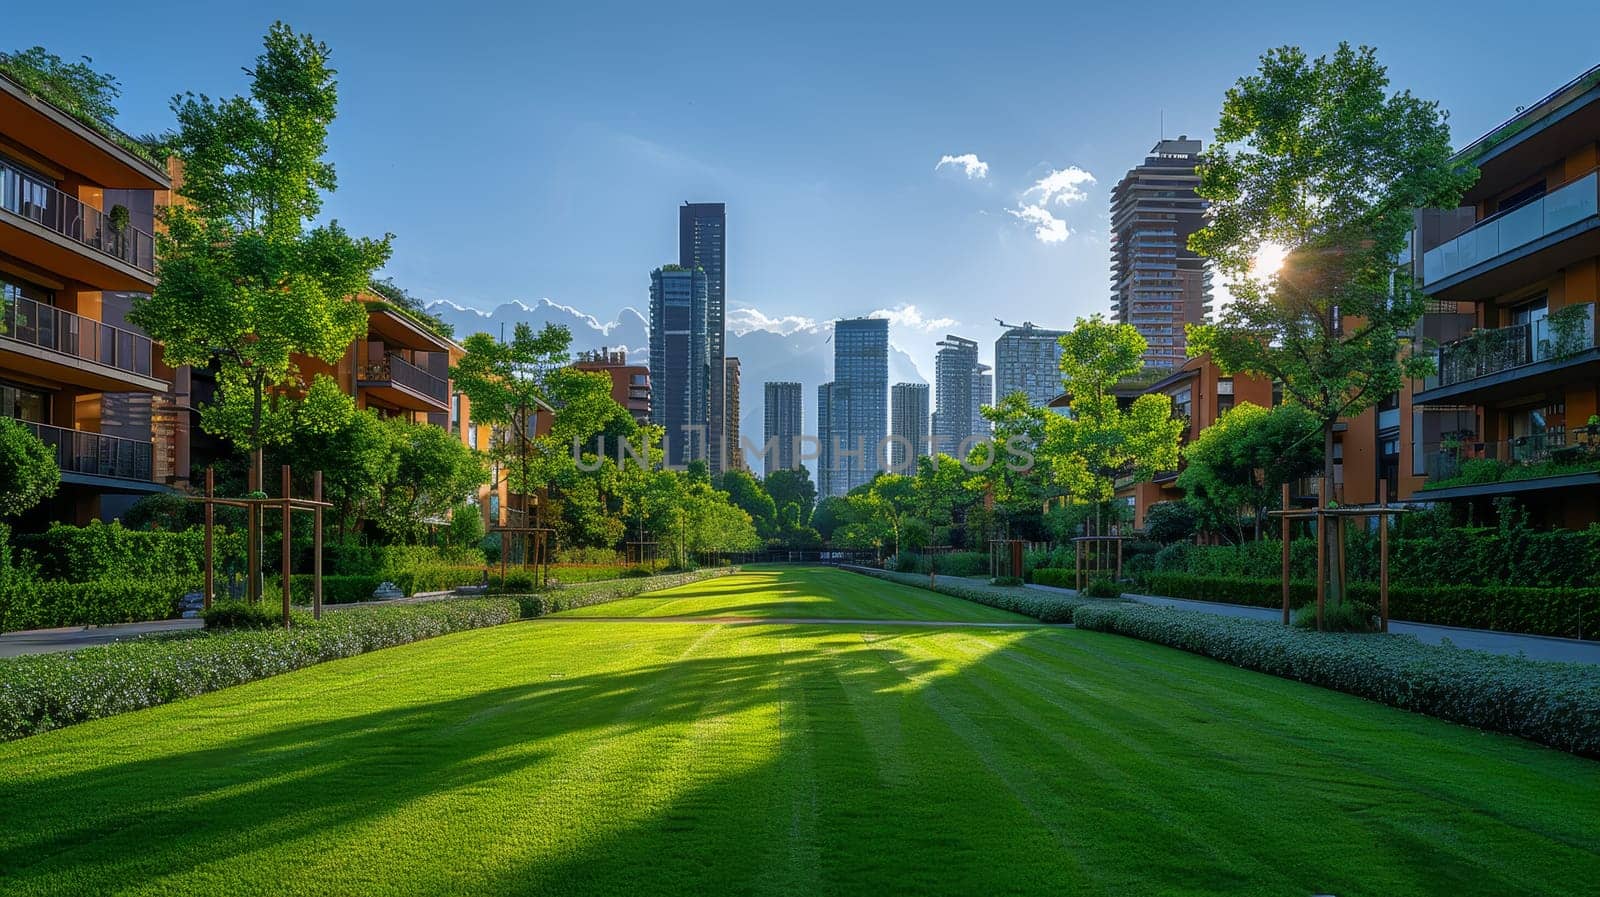 Beautiful view of real estate homes in Milan, Italy. Business district in summer. Walking area with trees and grass. Modern residential buildings in a public green area.